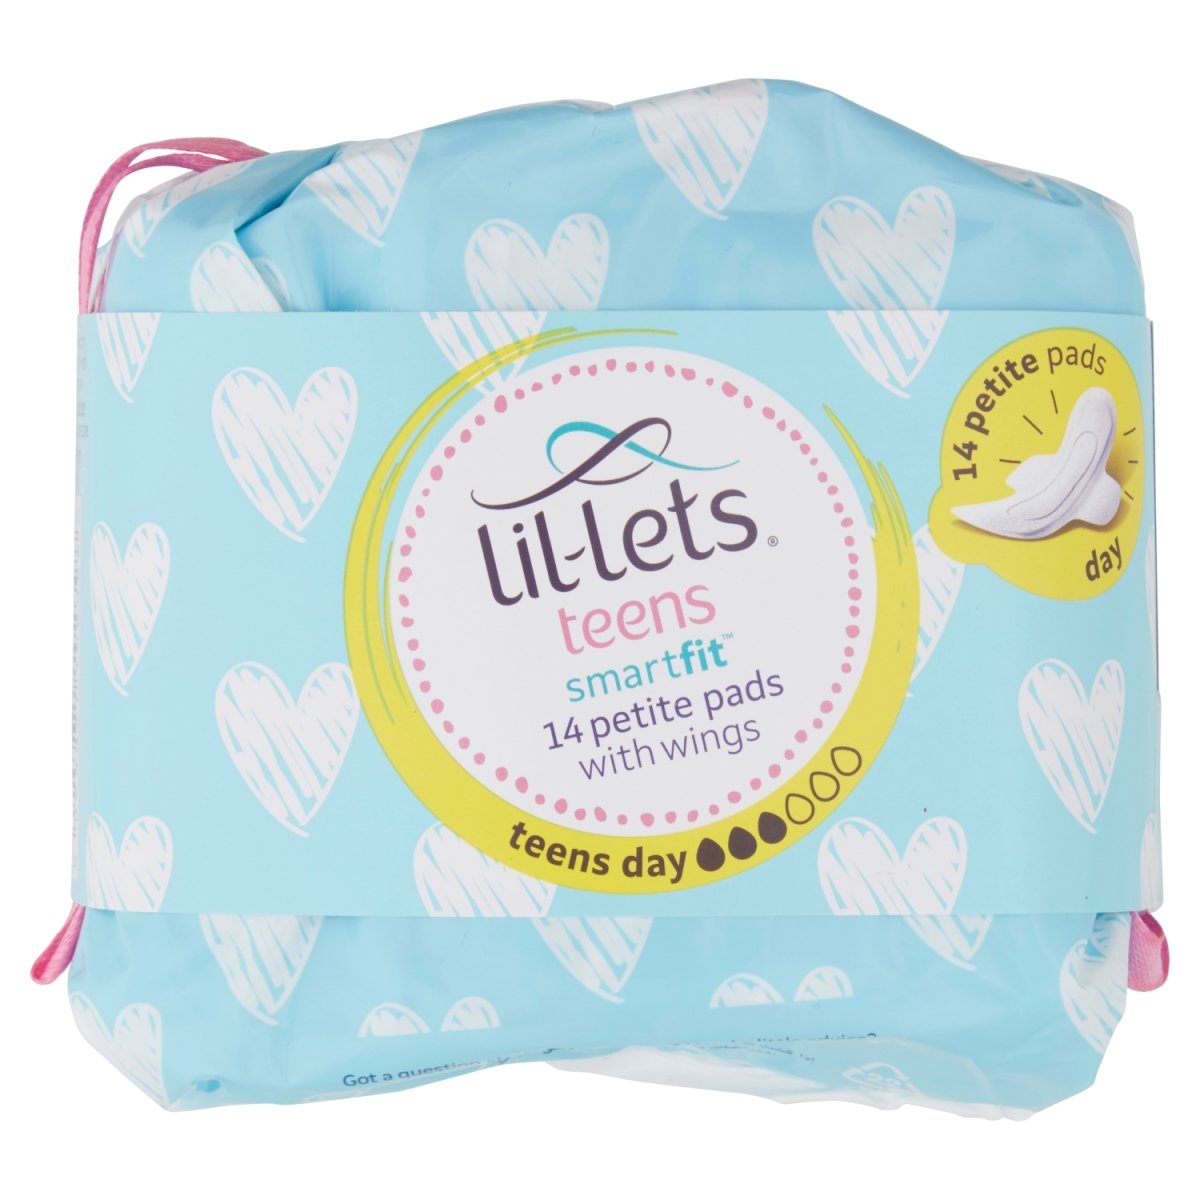 Lil-Lets Teen Towels Day - Intamarque 5025971102398